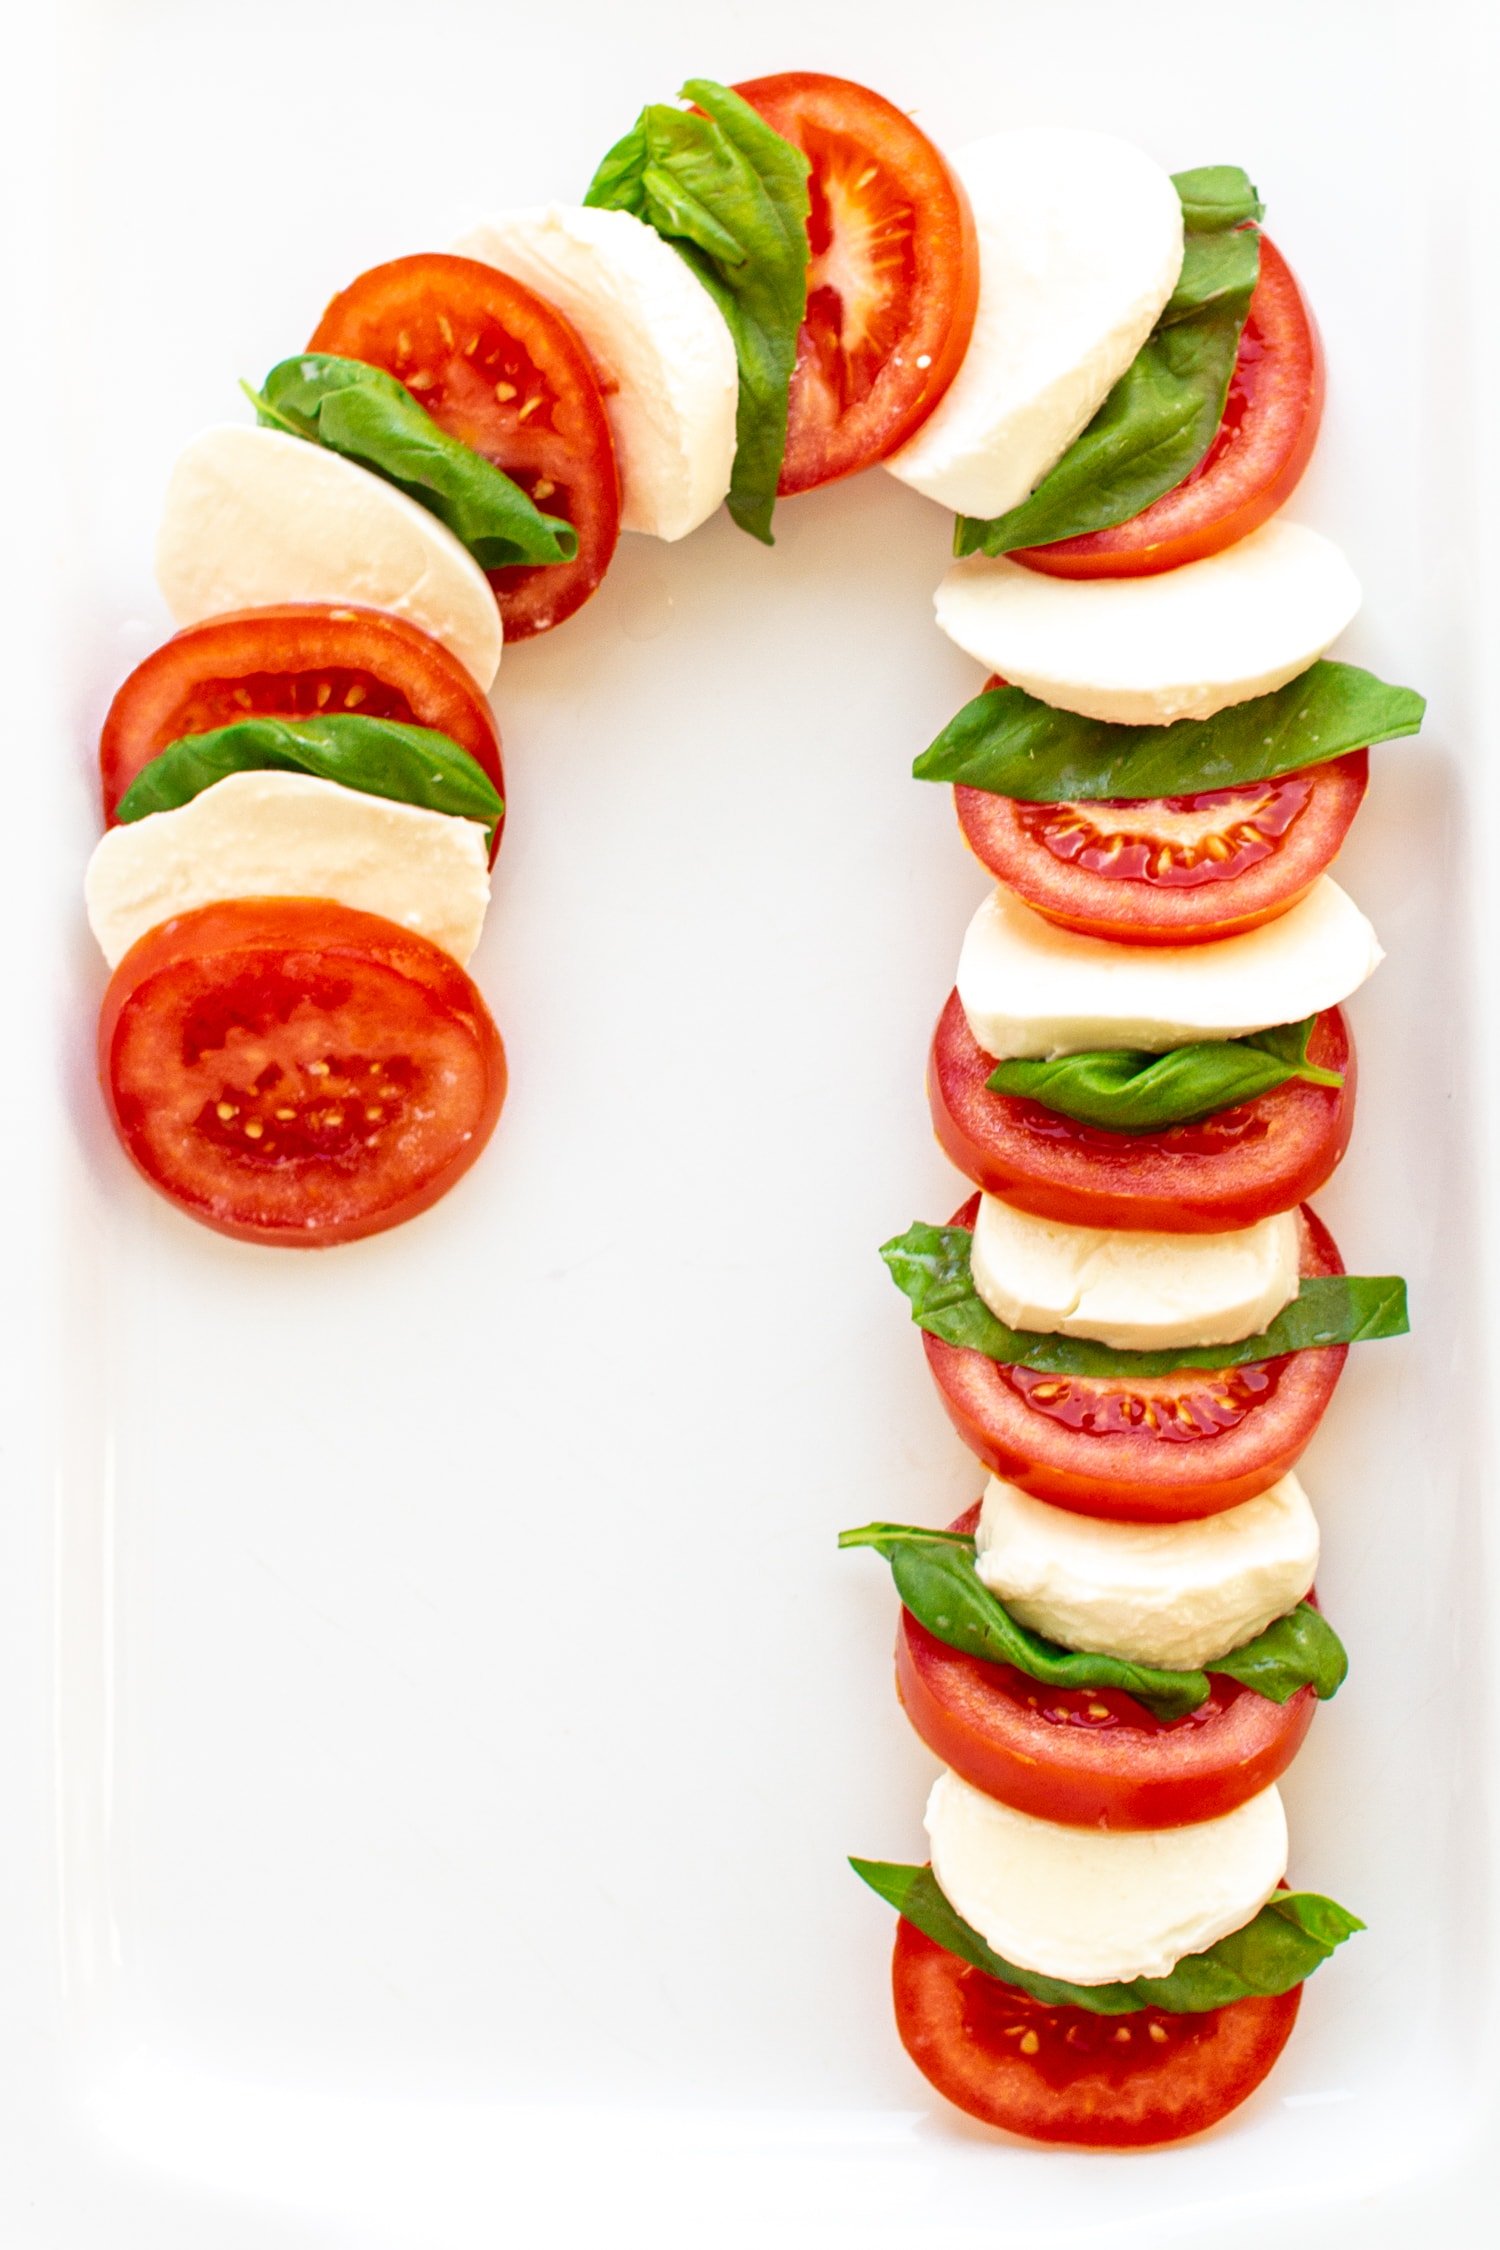 Caprese salad arranged in the shape of a candy cane on a white platter.